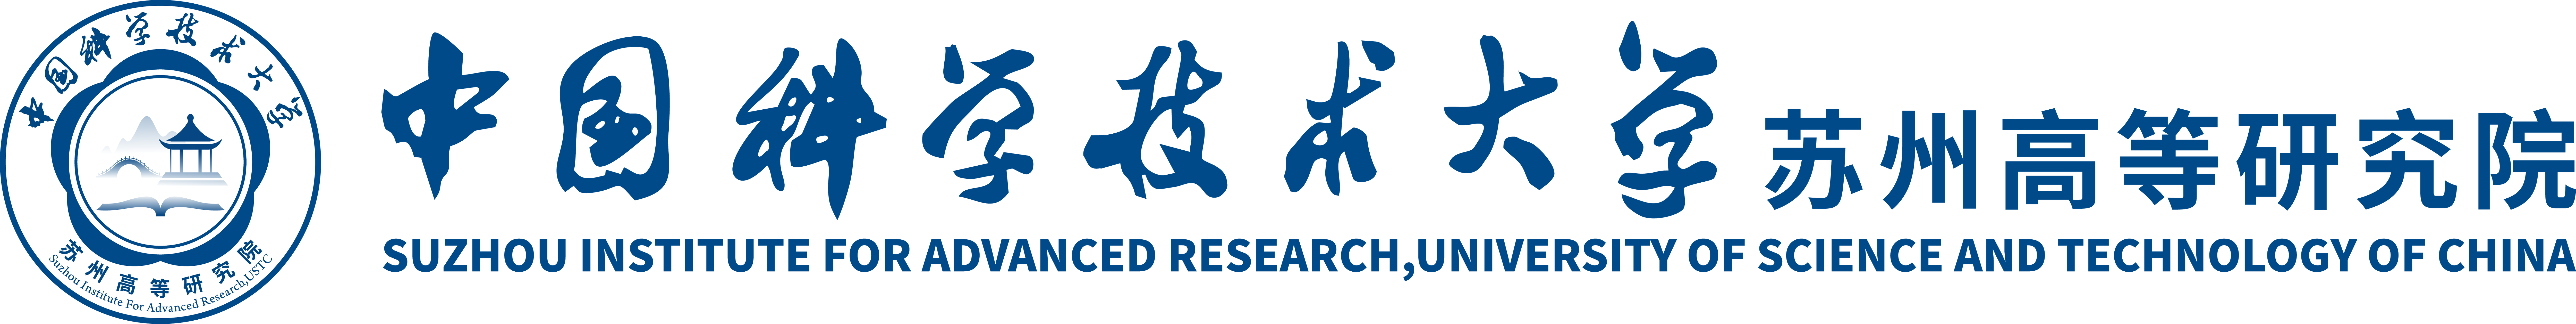 University of Science and Technology of China, Suzhou Institute for Advanced Research